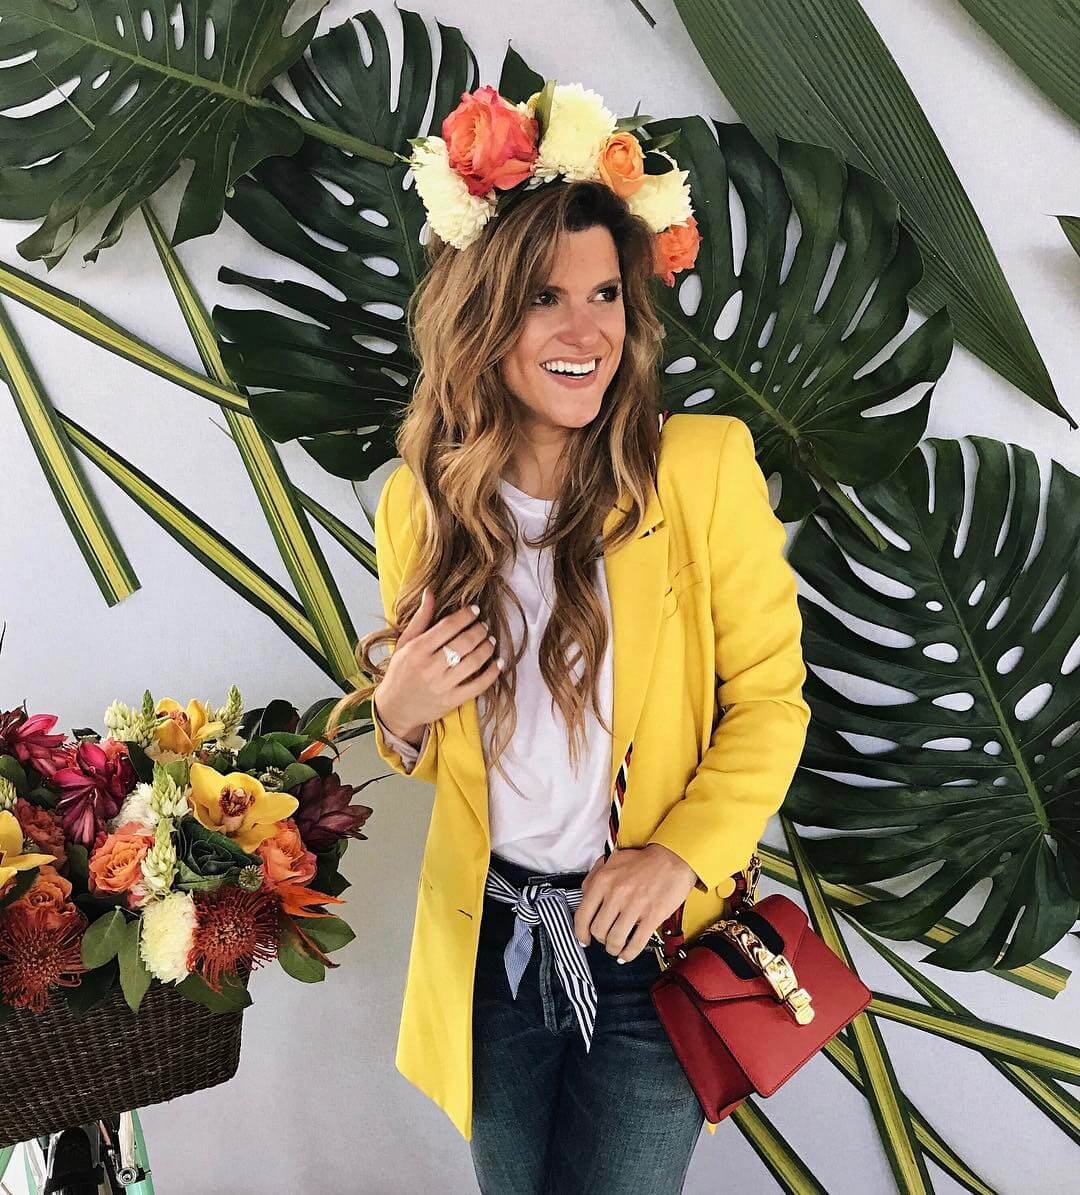 brighton keller at Create & Cultivate conference wearing yellow blazer and white tee 